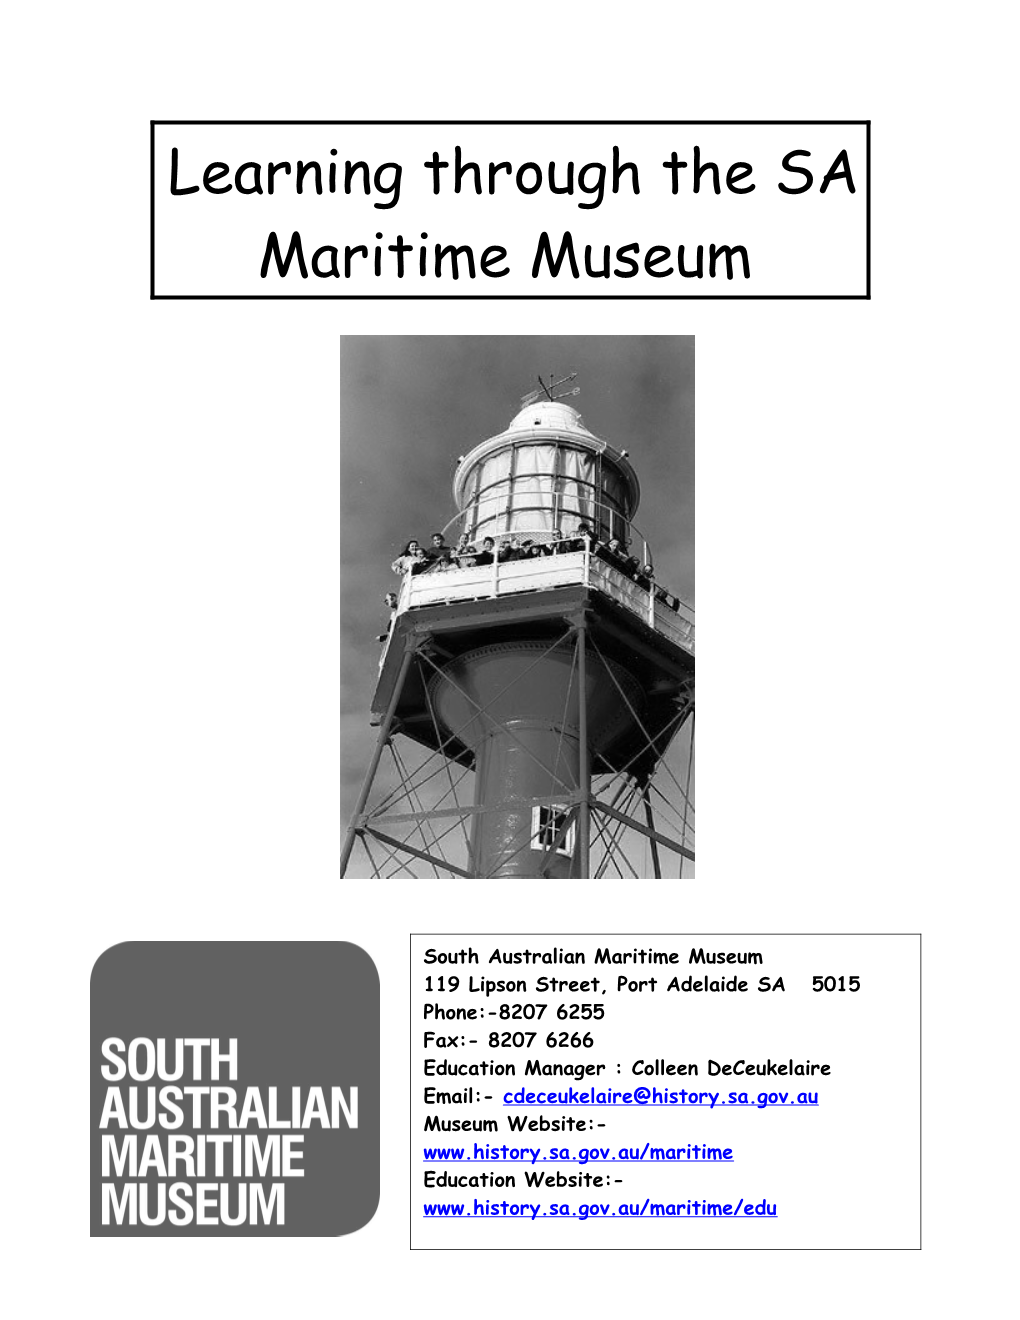 Learning Through the SA Maritime Museum